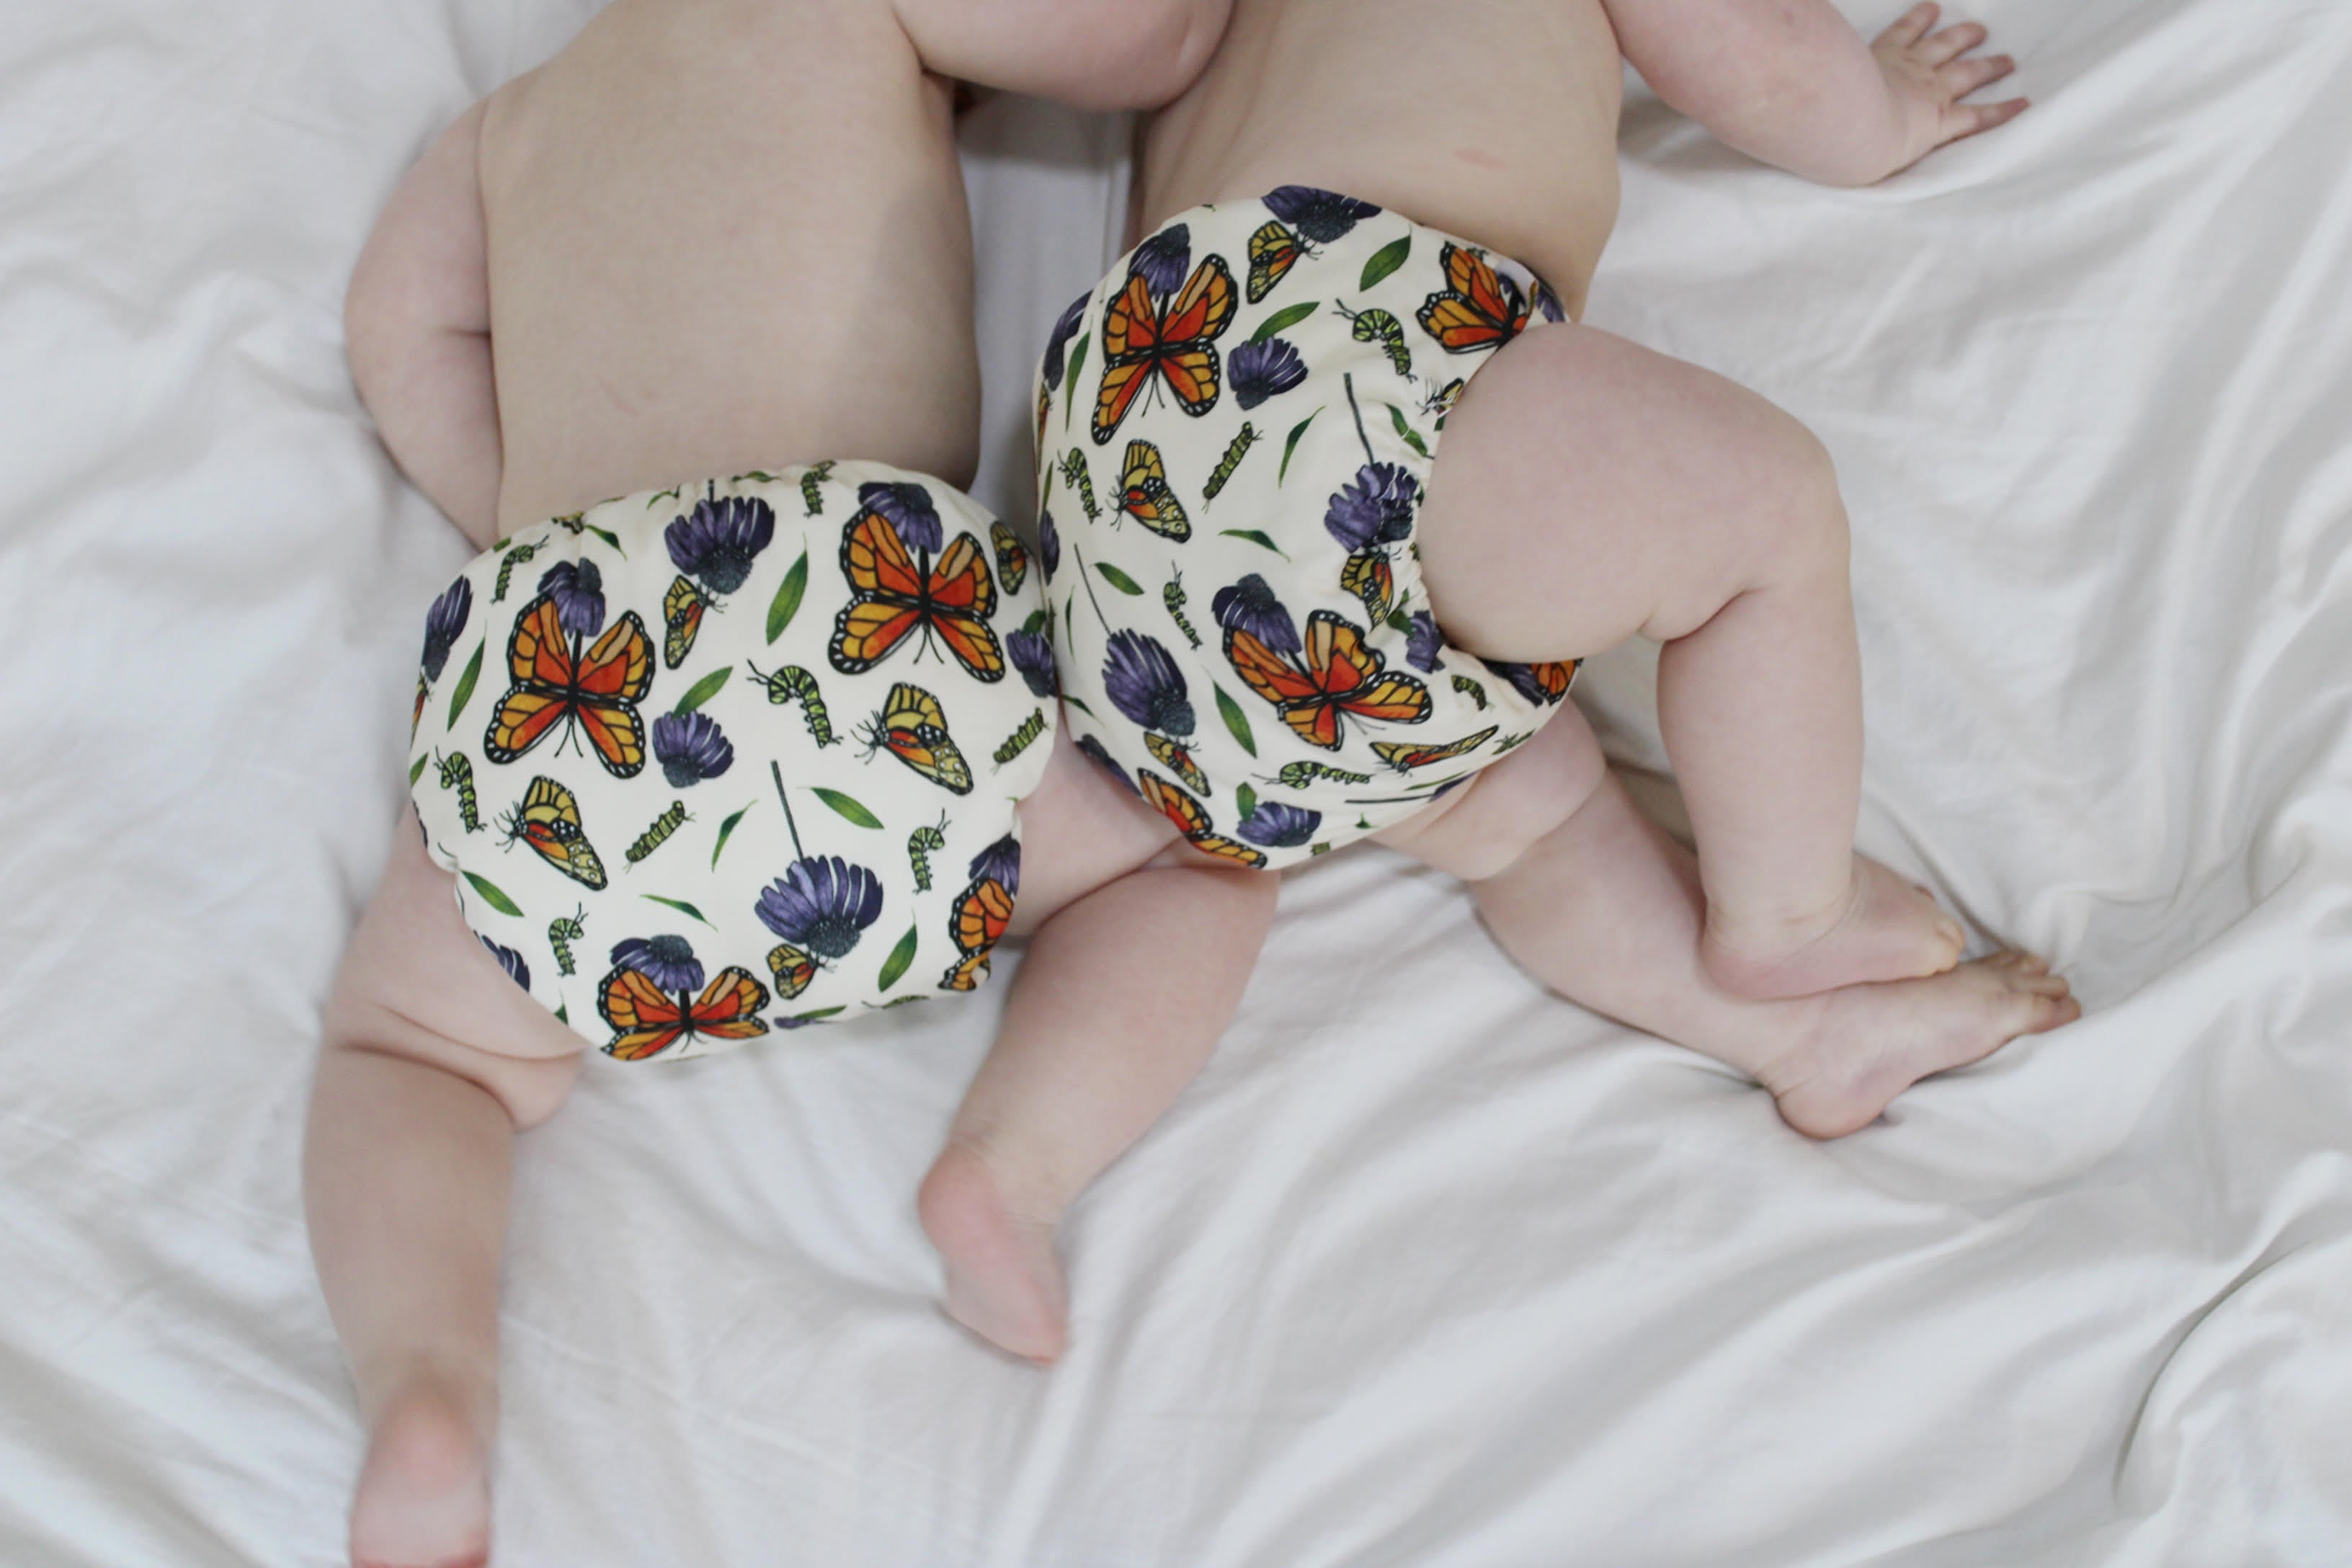 Getting Started on Cloth Nappies - By Megan Handel